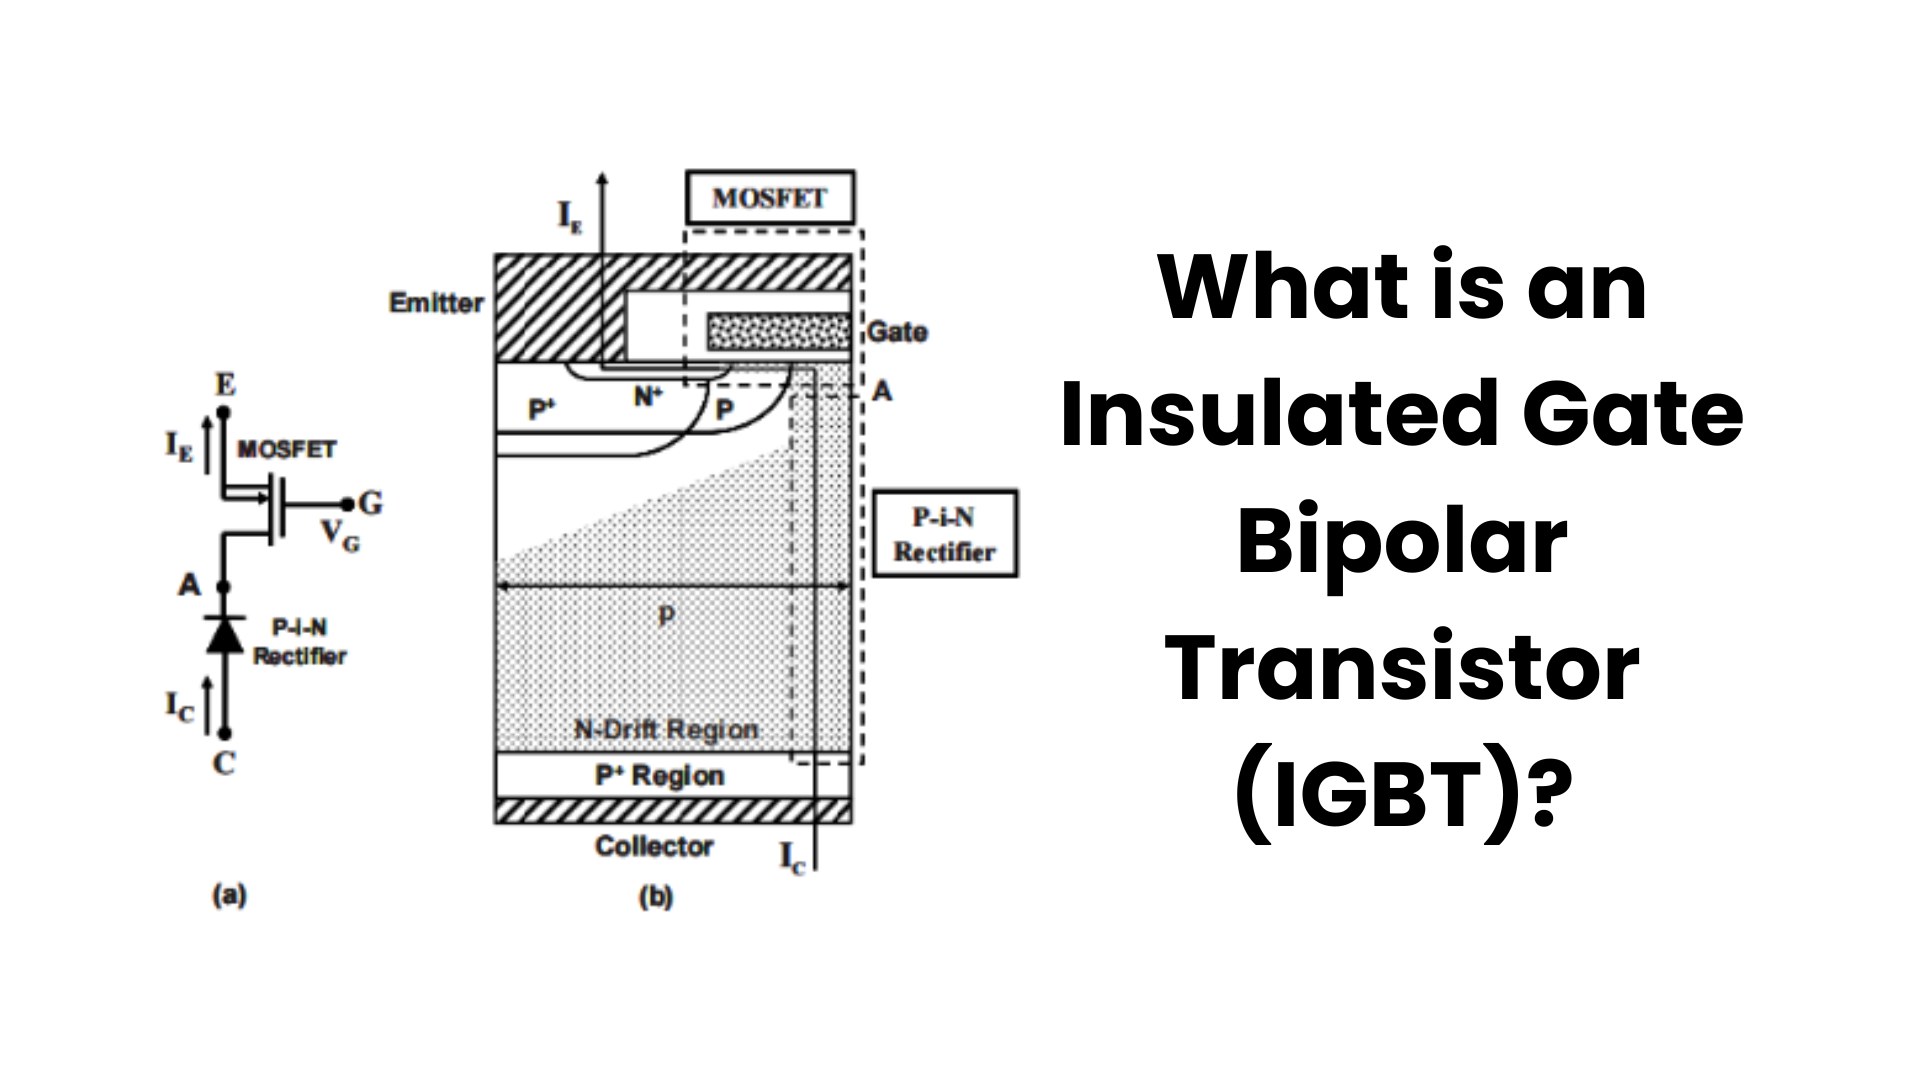 What is an Insulated Gate Bipolar Transistor (IGBT)?